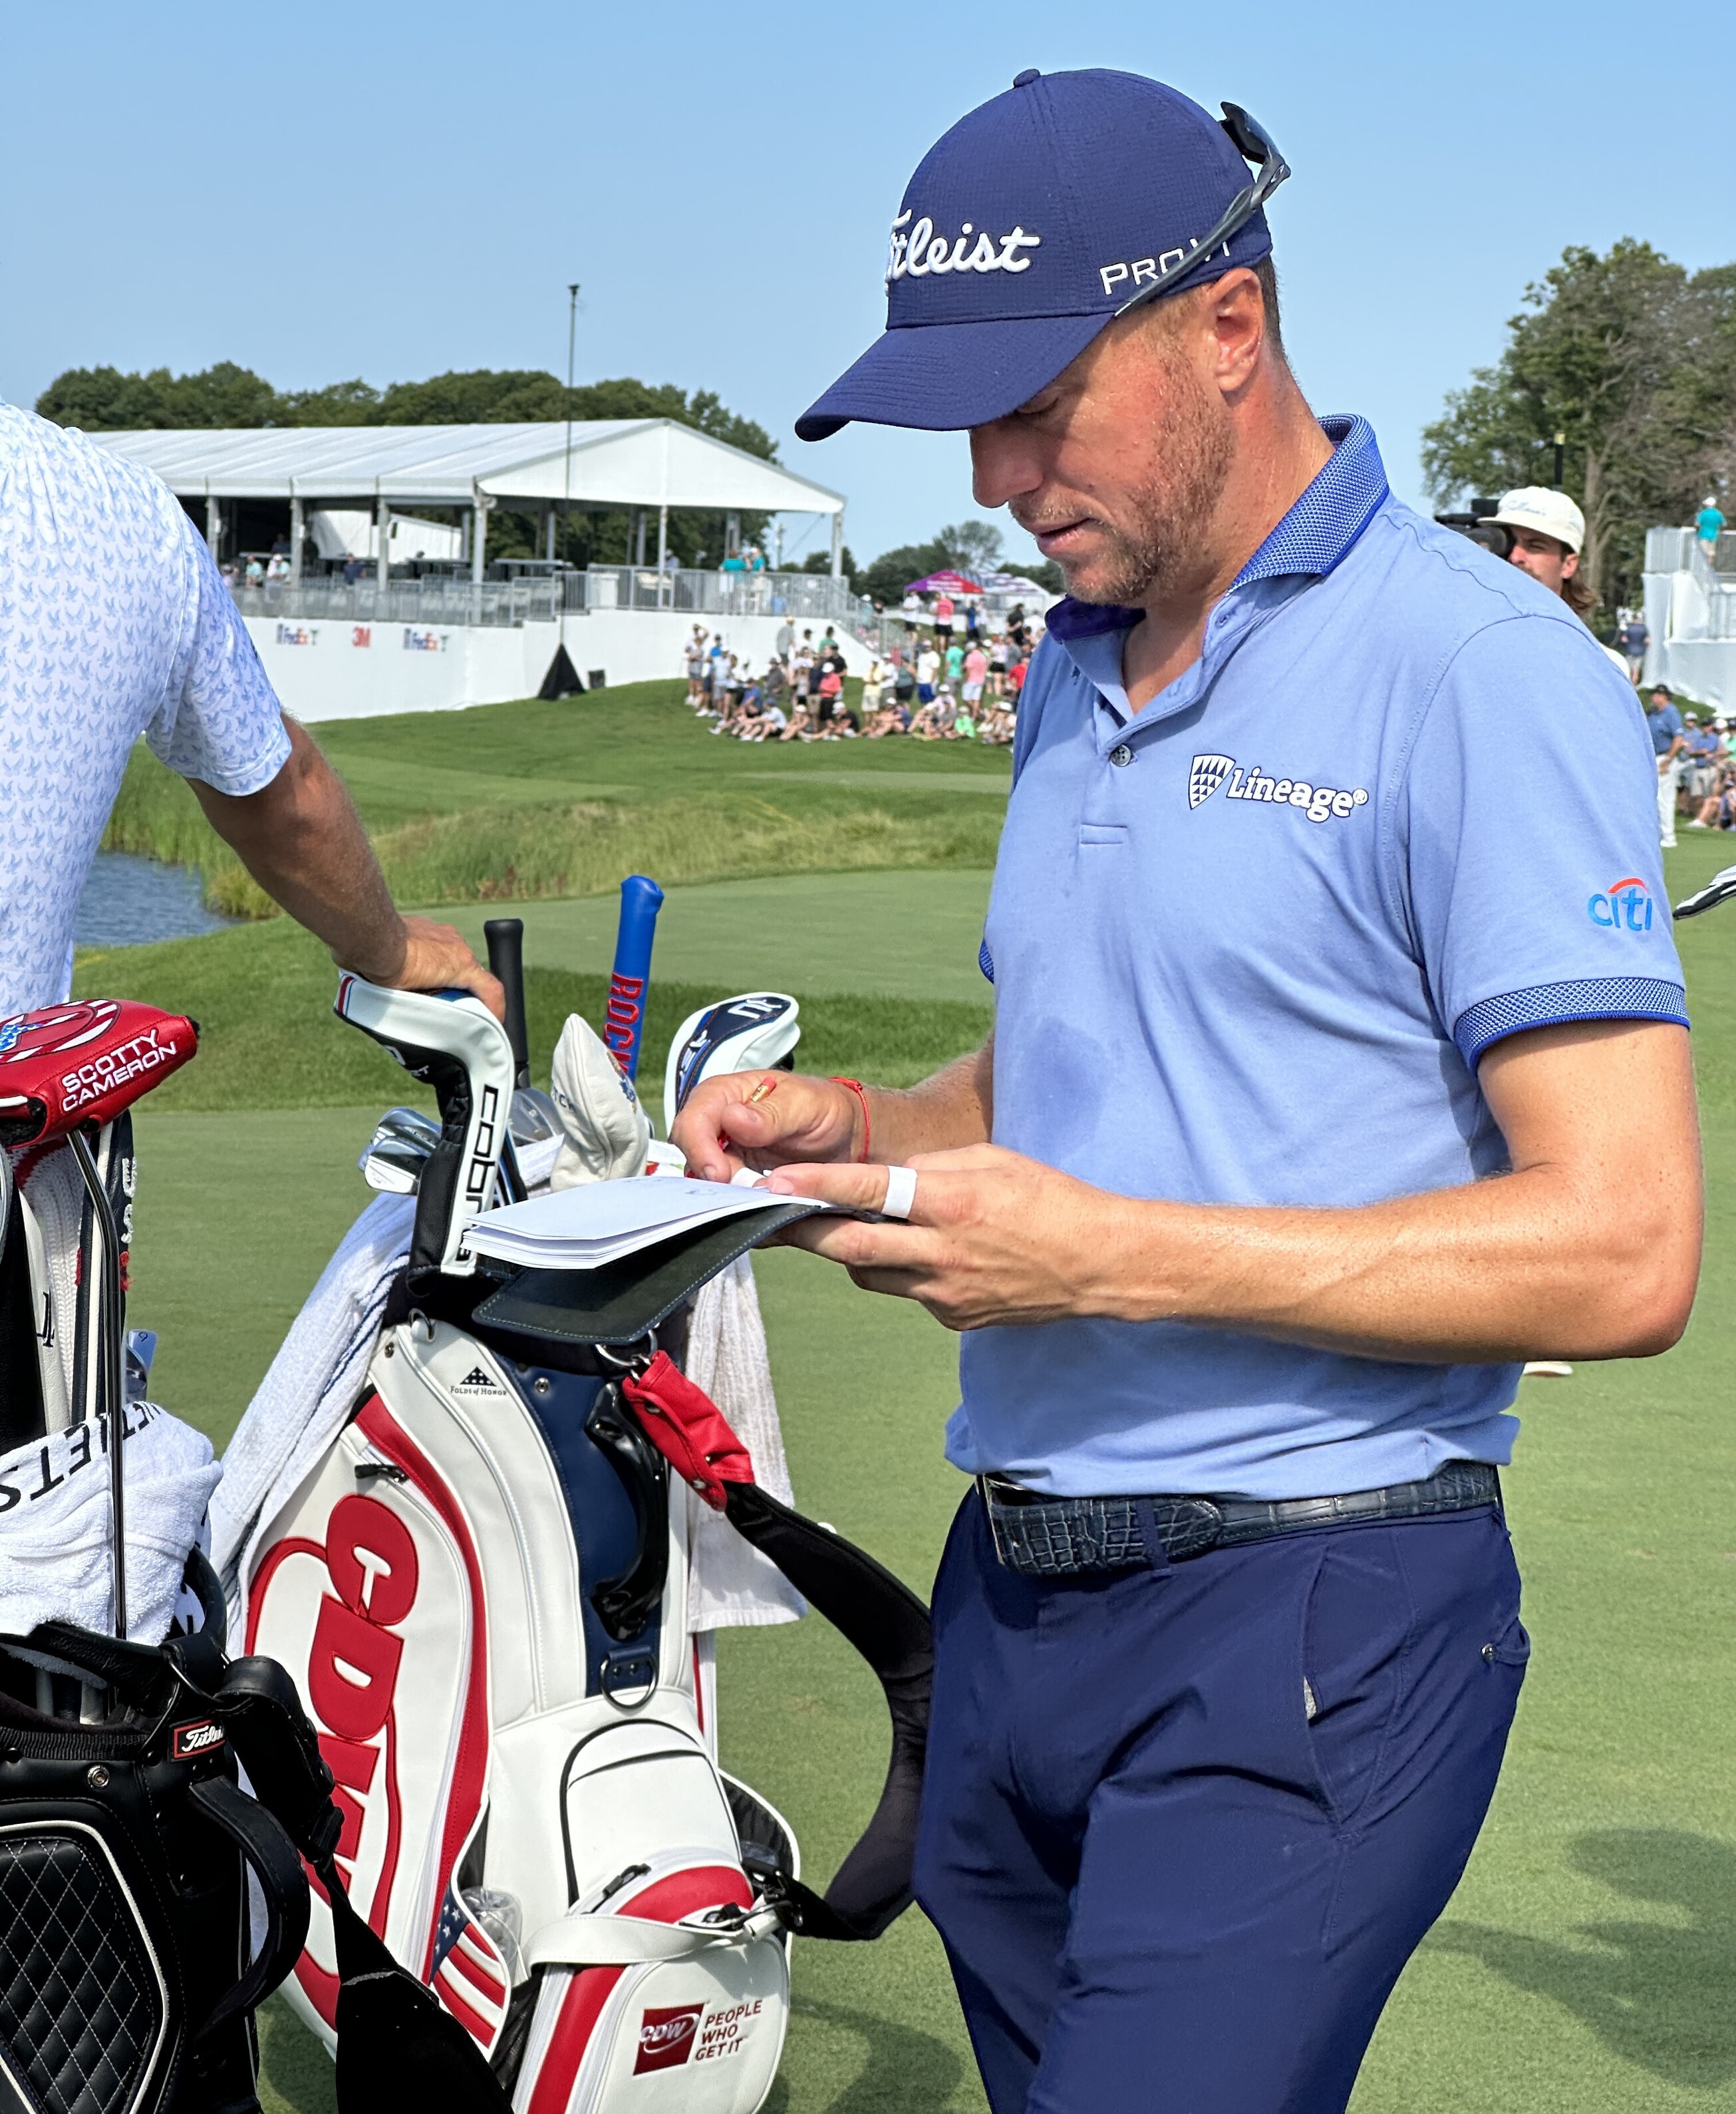 Close-up photo of Justin Thomas checking his yardage book on the 17th tee at the 3M Open golf tournament at TPC Twin Cities in Blaine, Minnesota